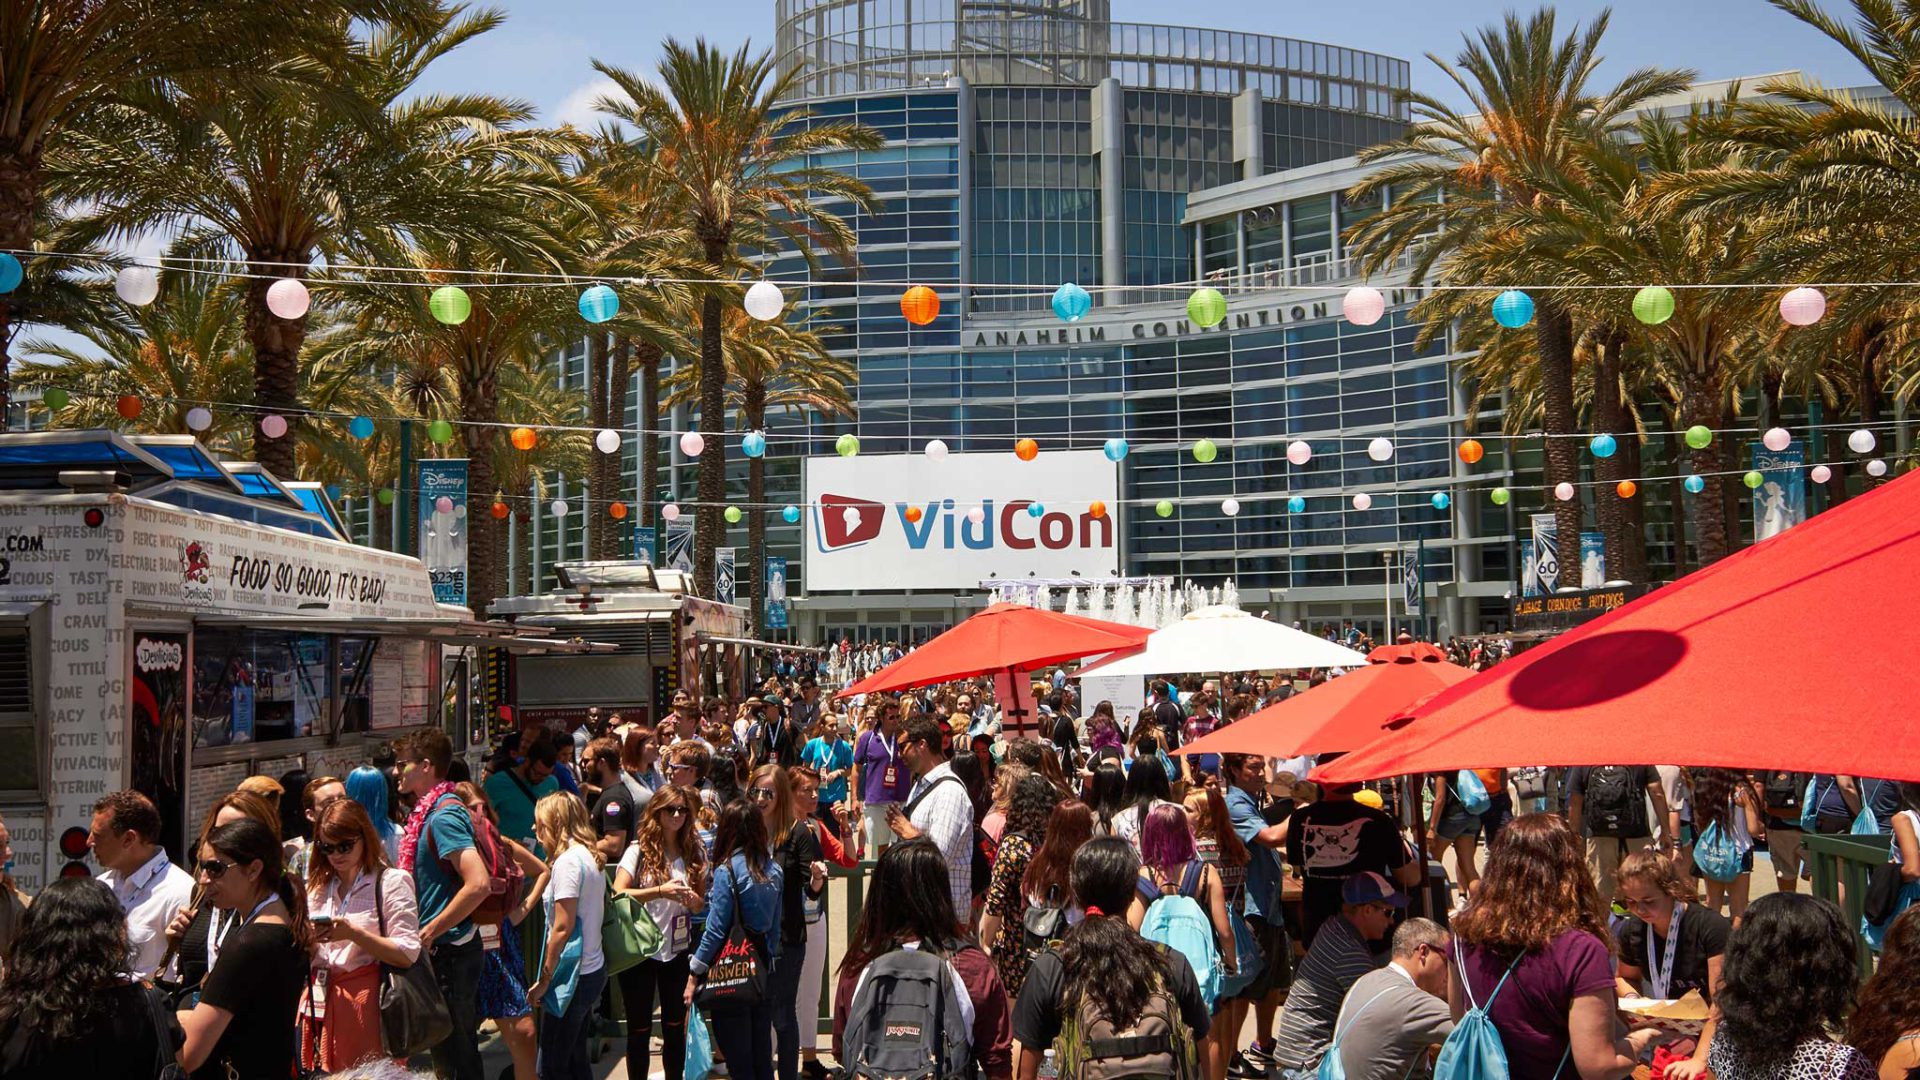 Busy crowds outside VidCon building